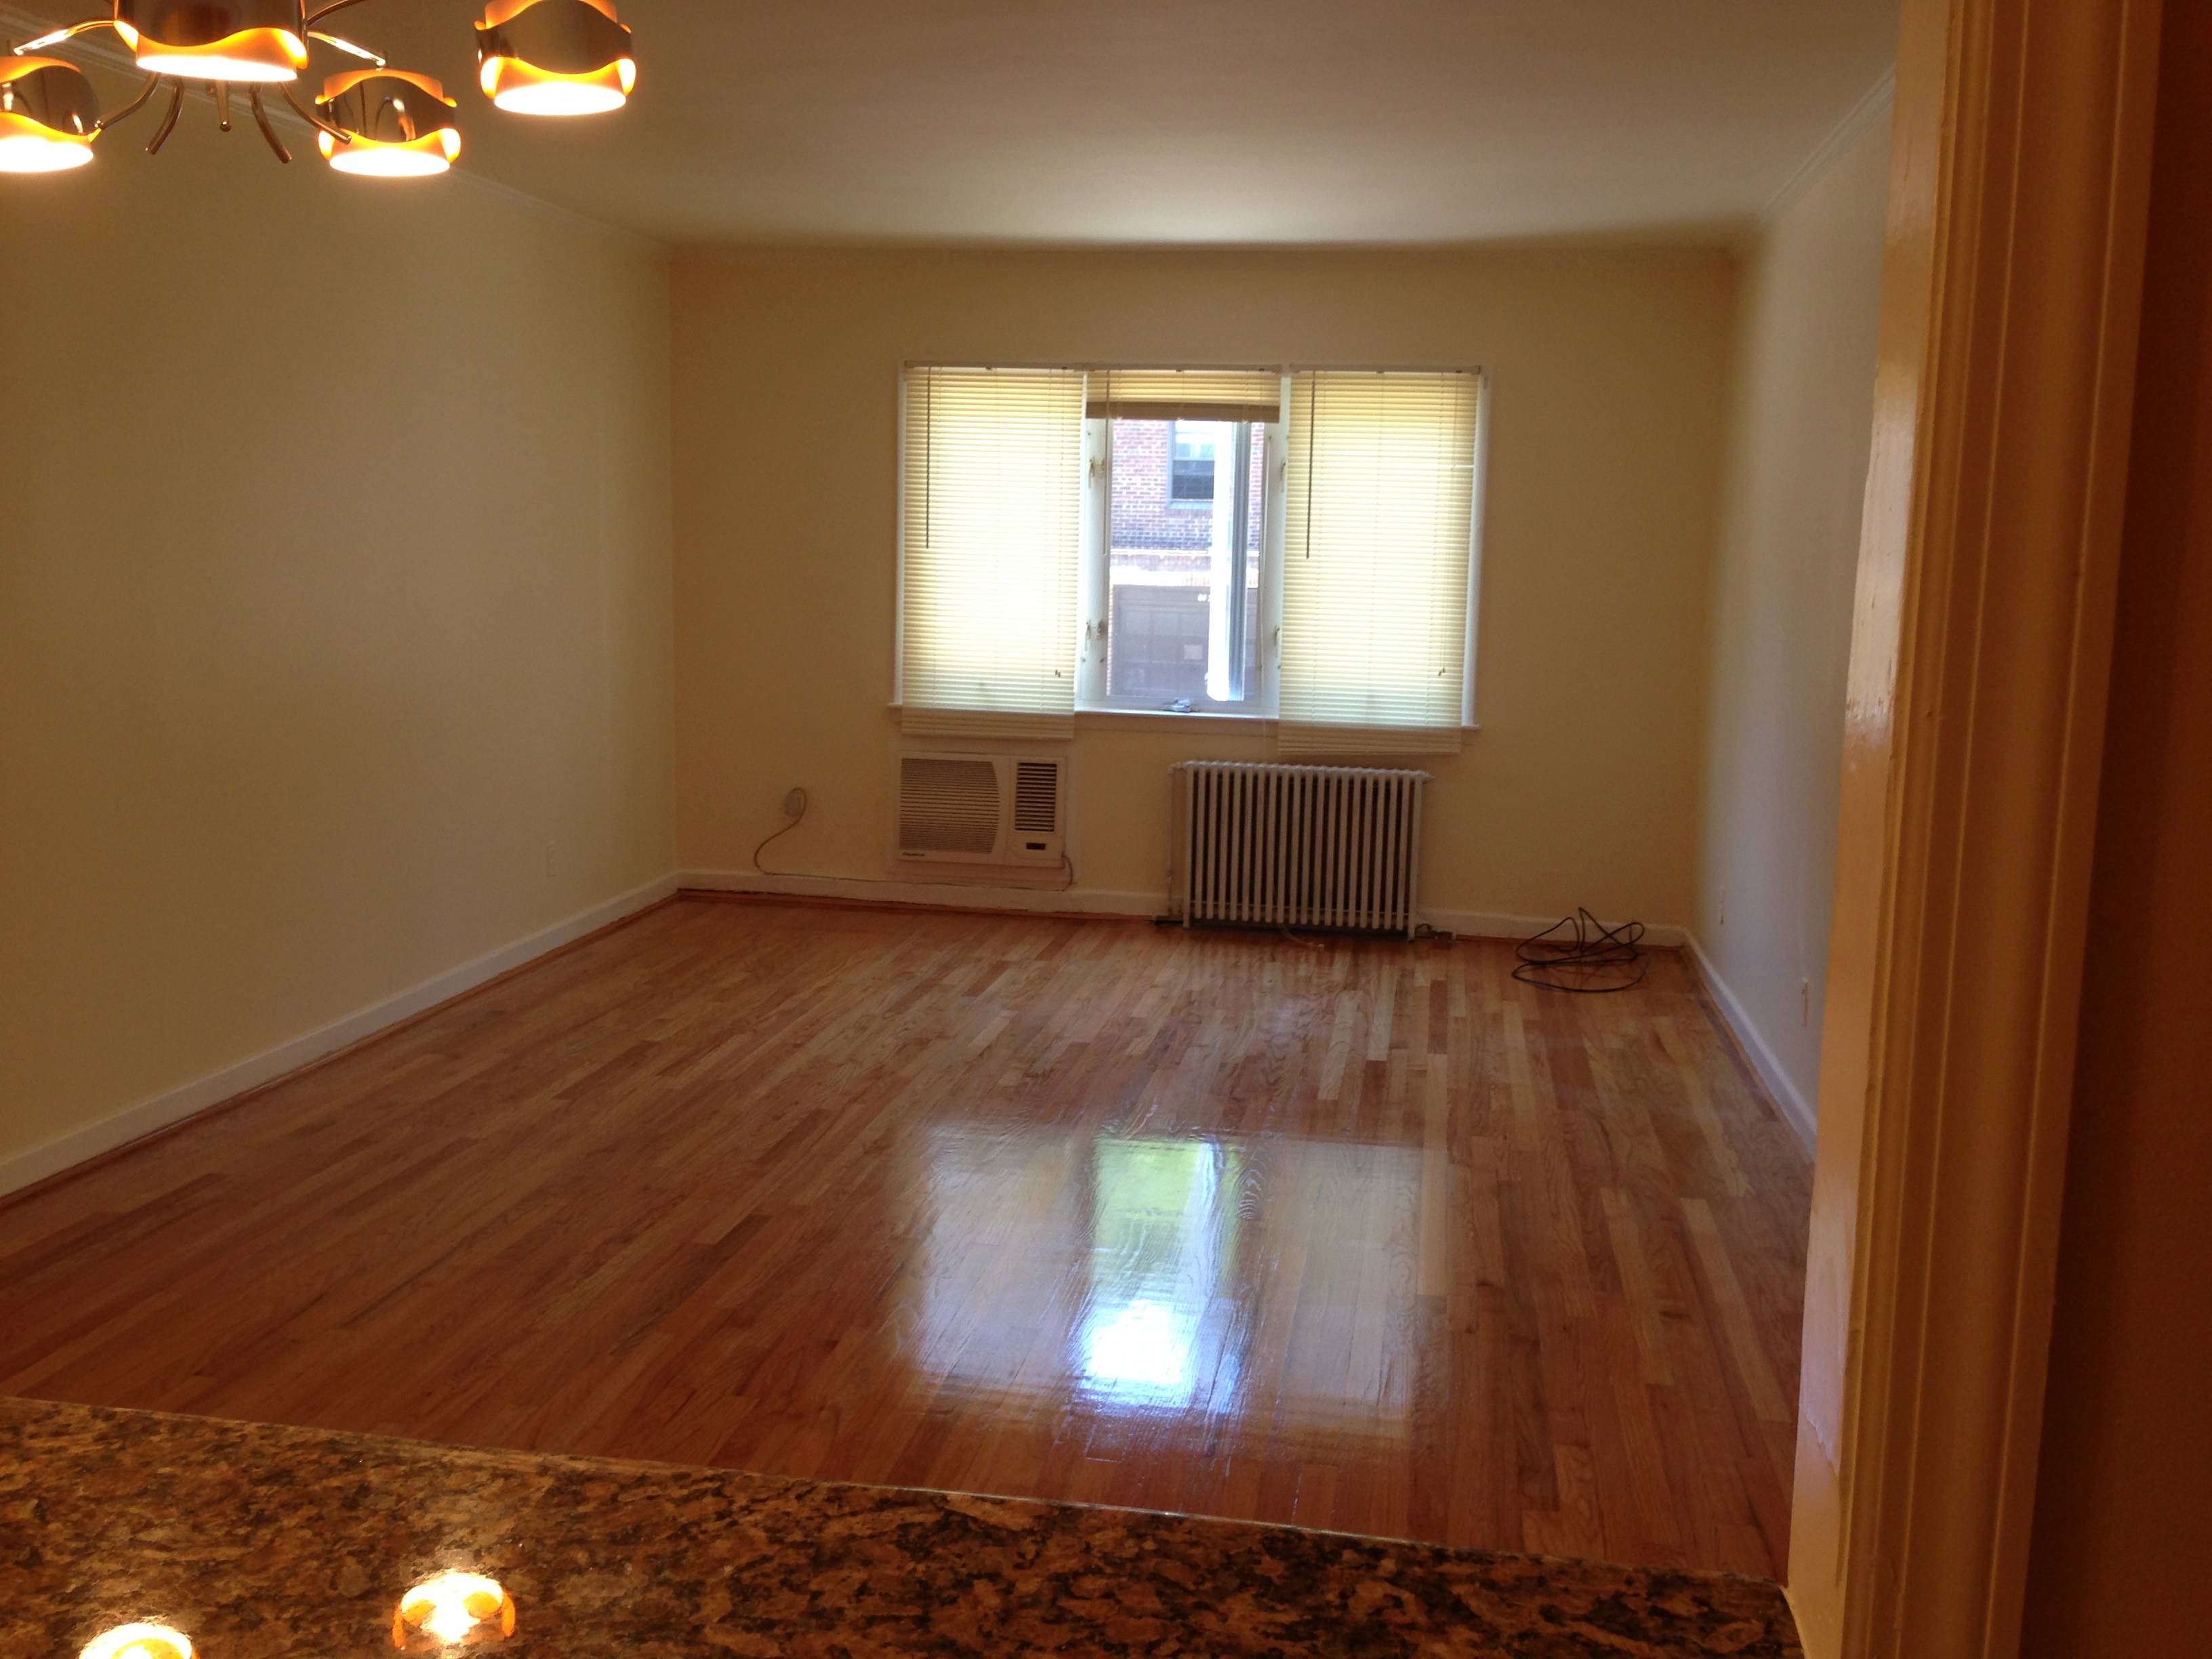 Newly Renovated 2-Bed/1-Bath in Kew Gardens-$1,600/month $1,775 w/ Garage Parking